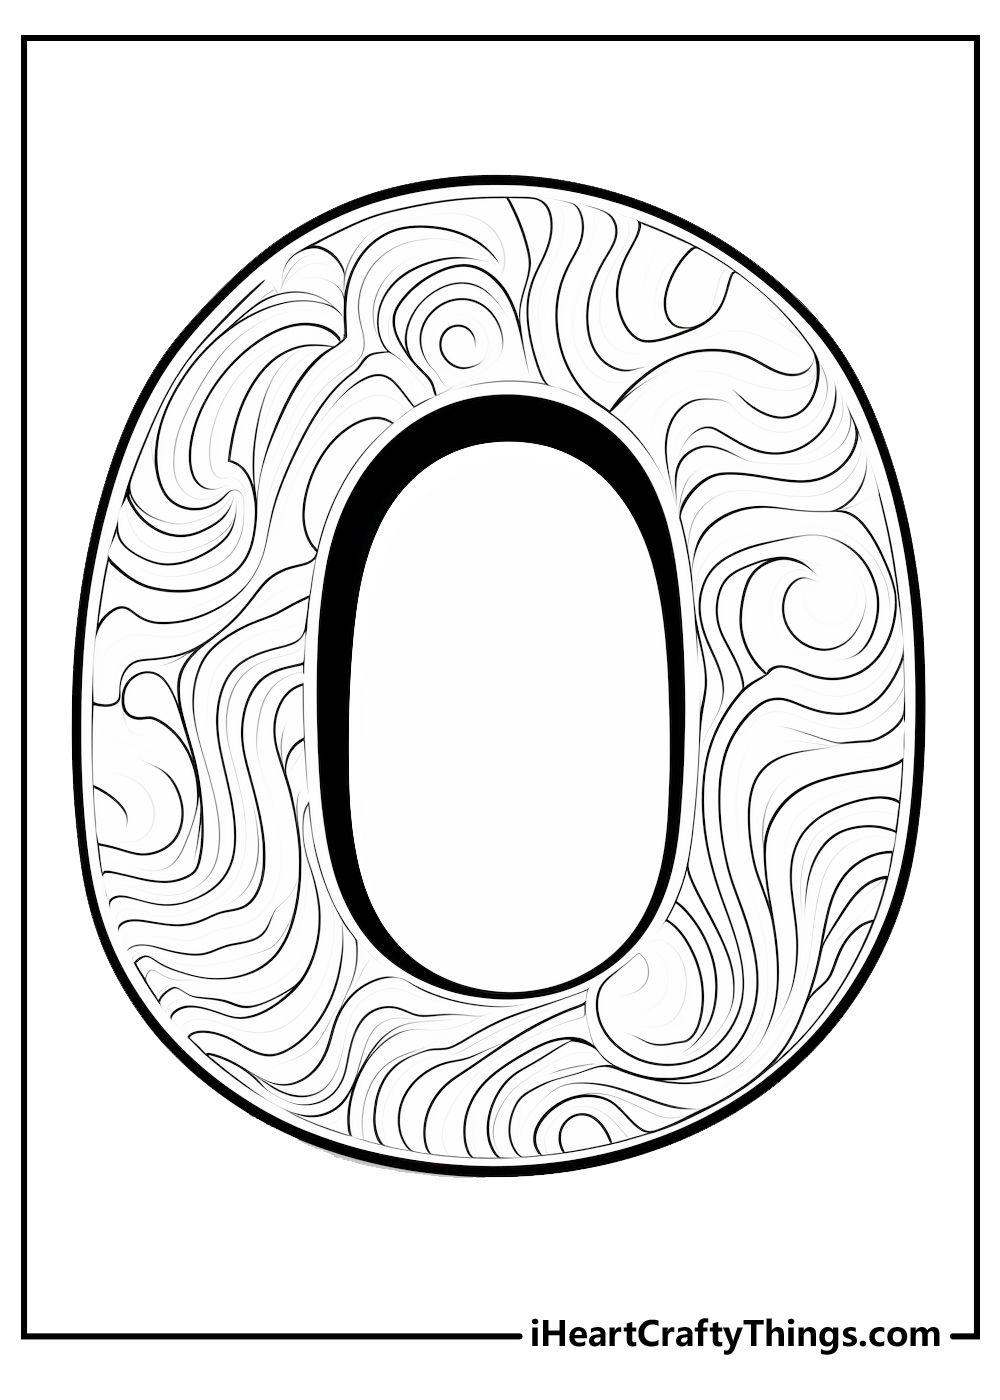 Letter o coloring pages free printables